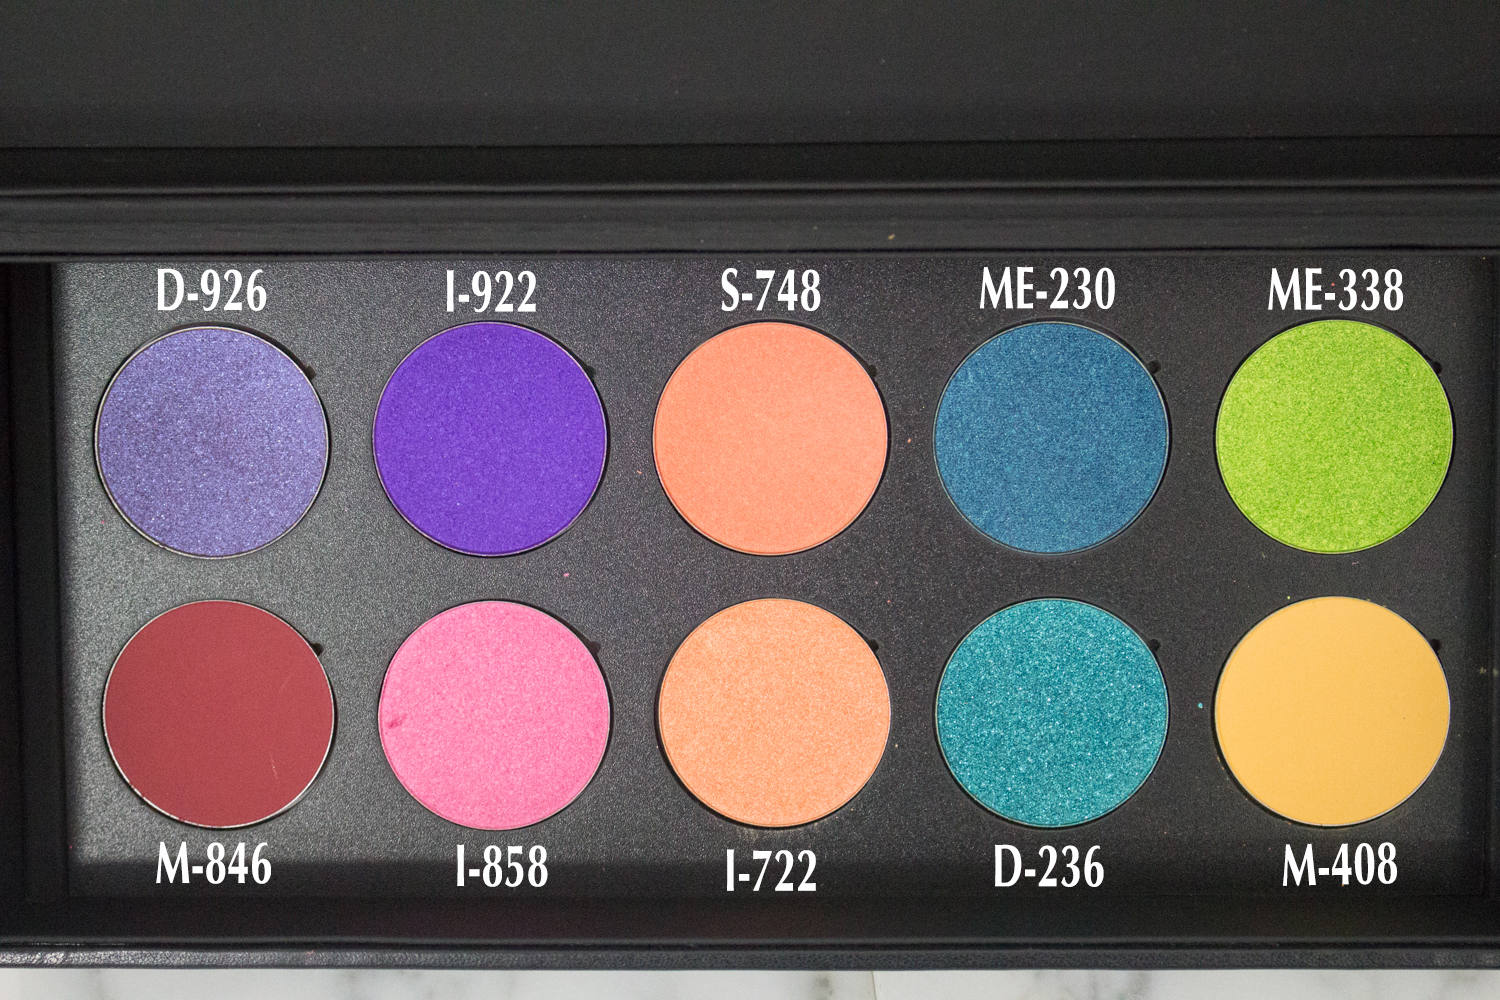 Review: Make Up For Ever Palette 9 Artist Shadow #1